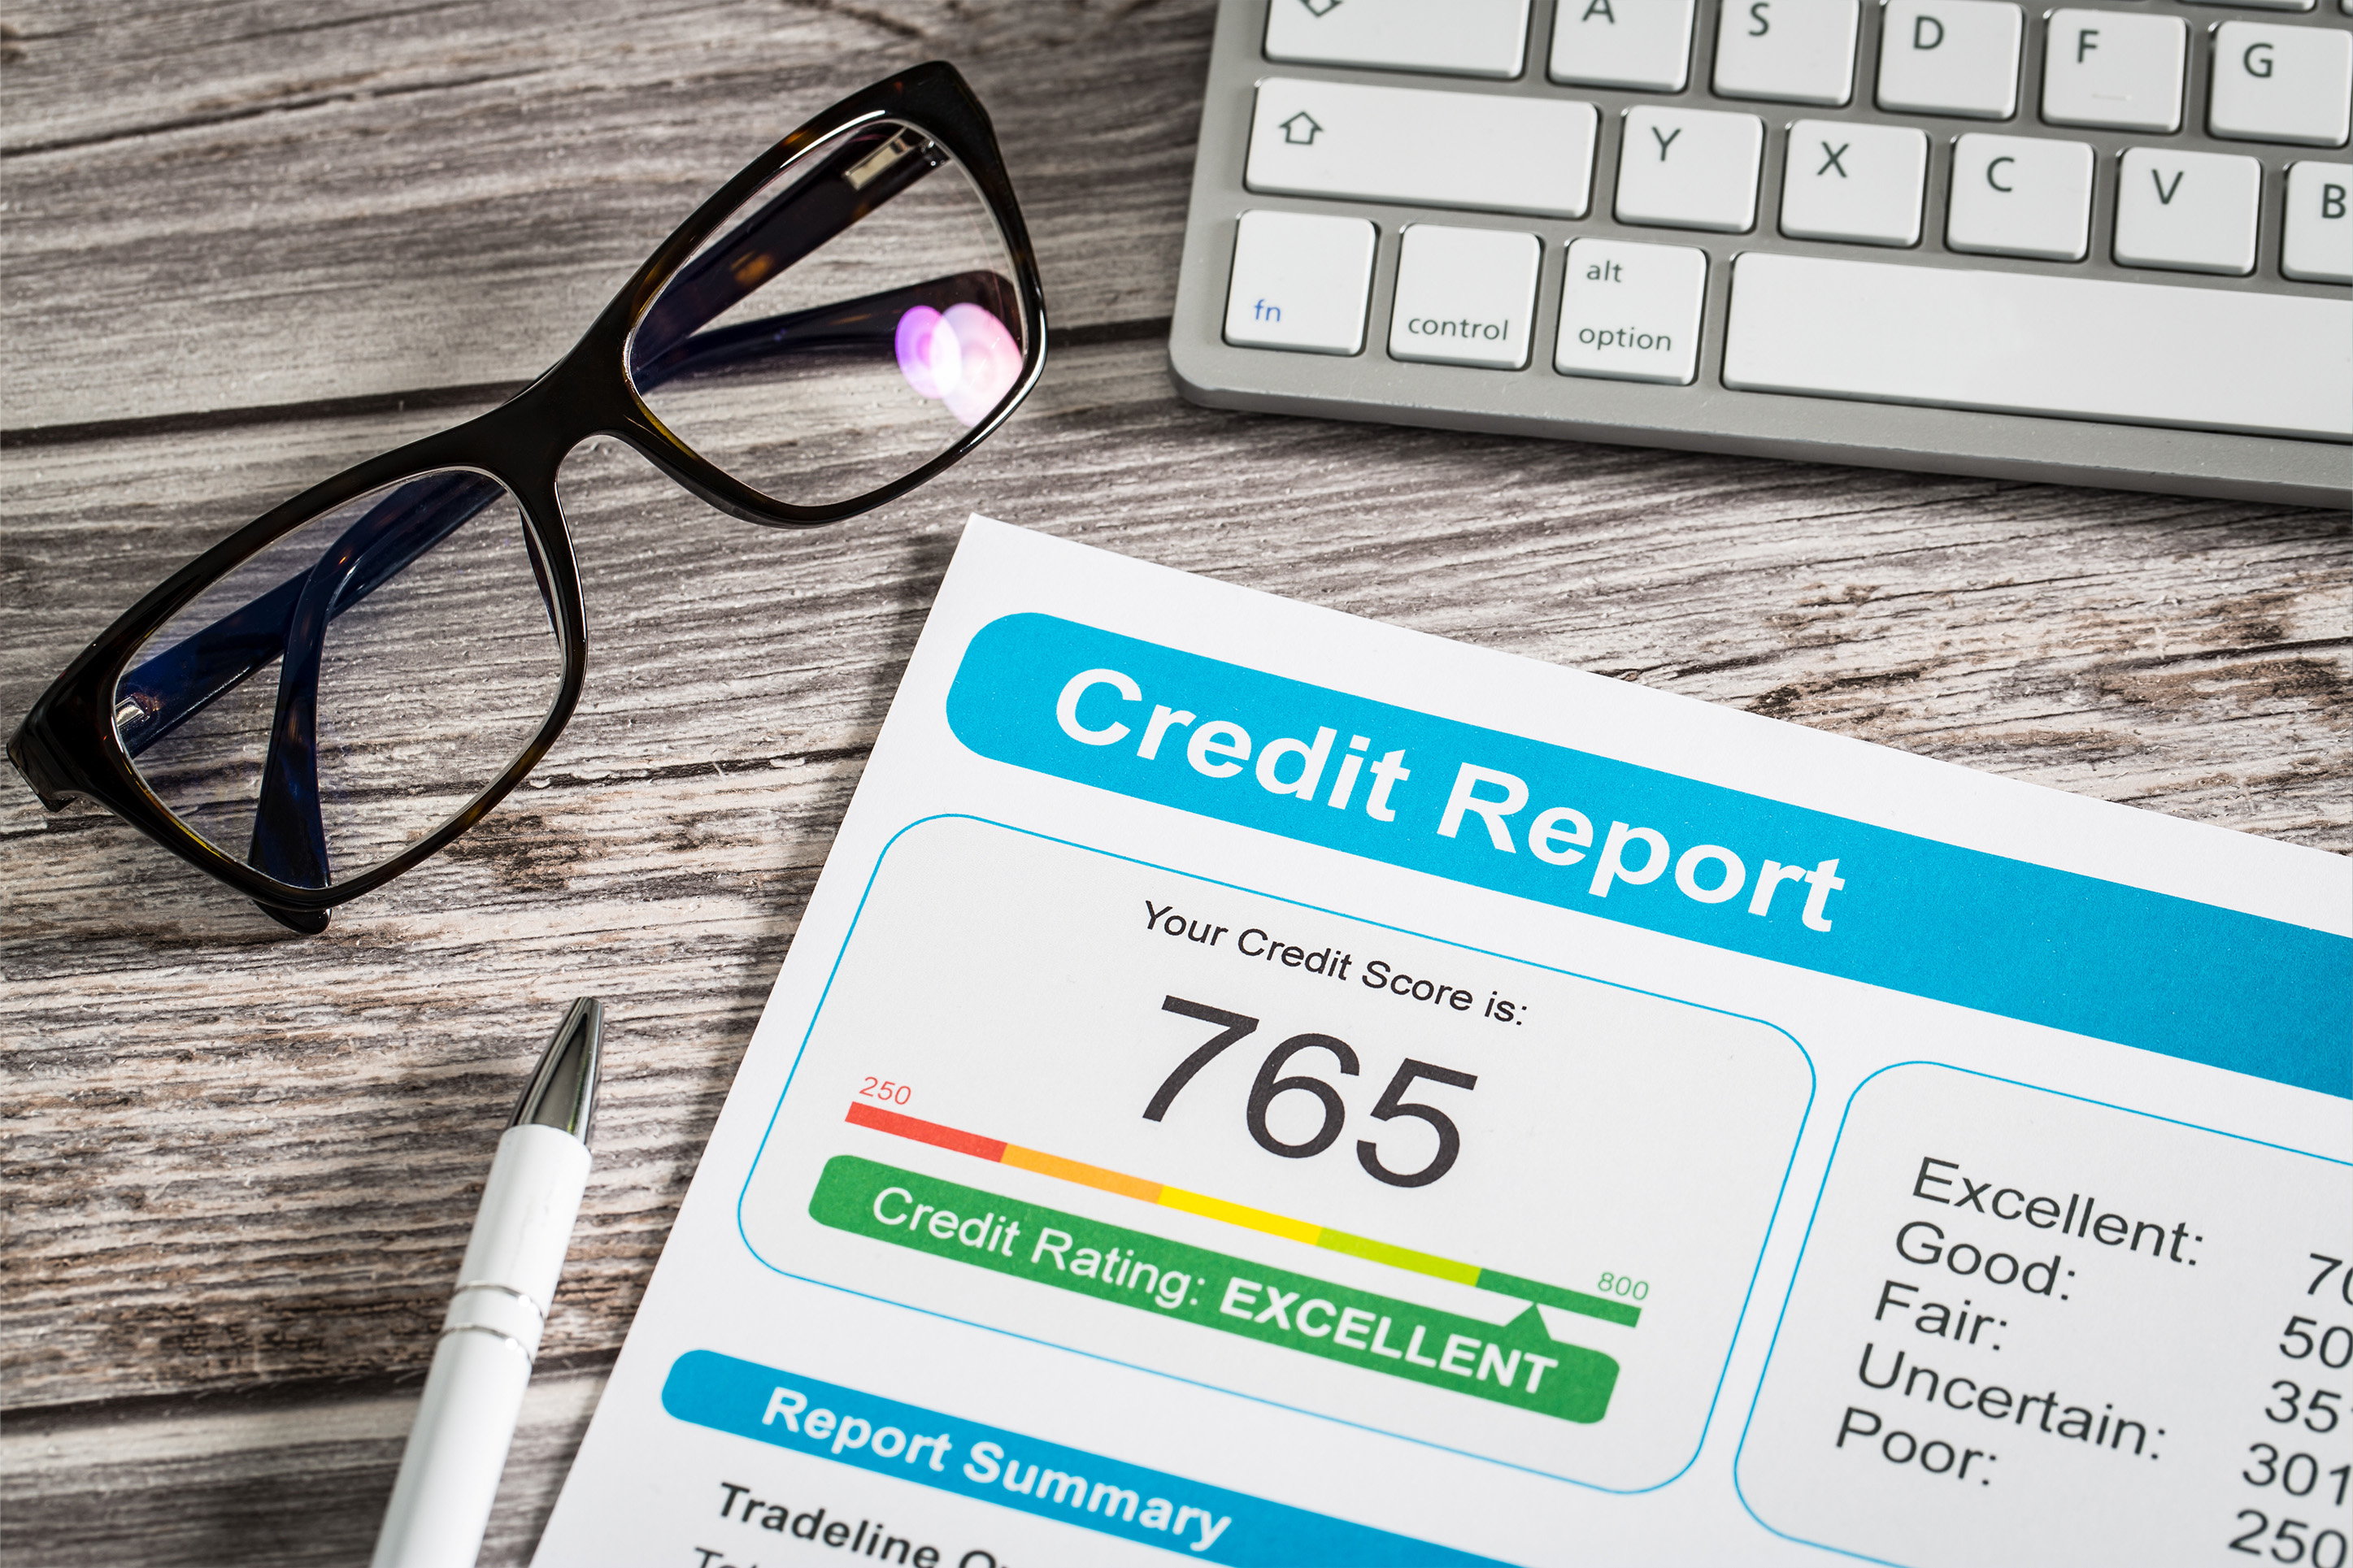 Image of a credit report